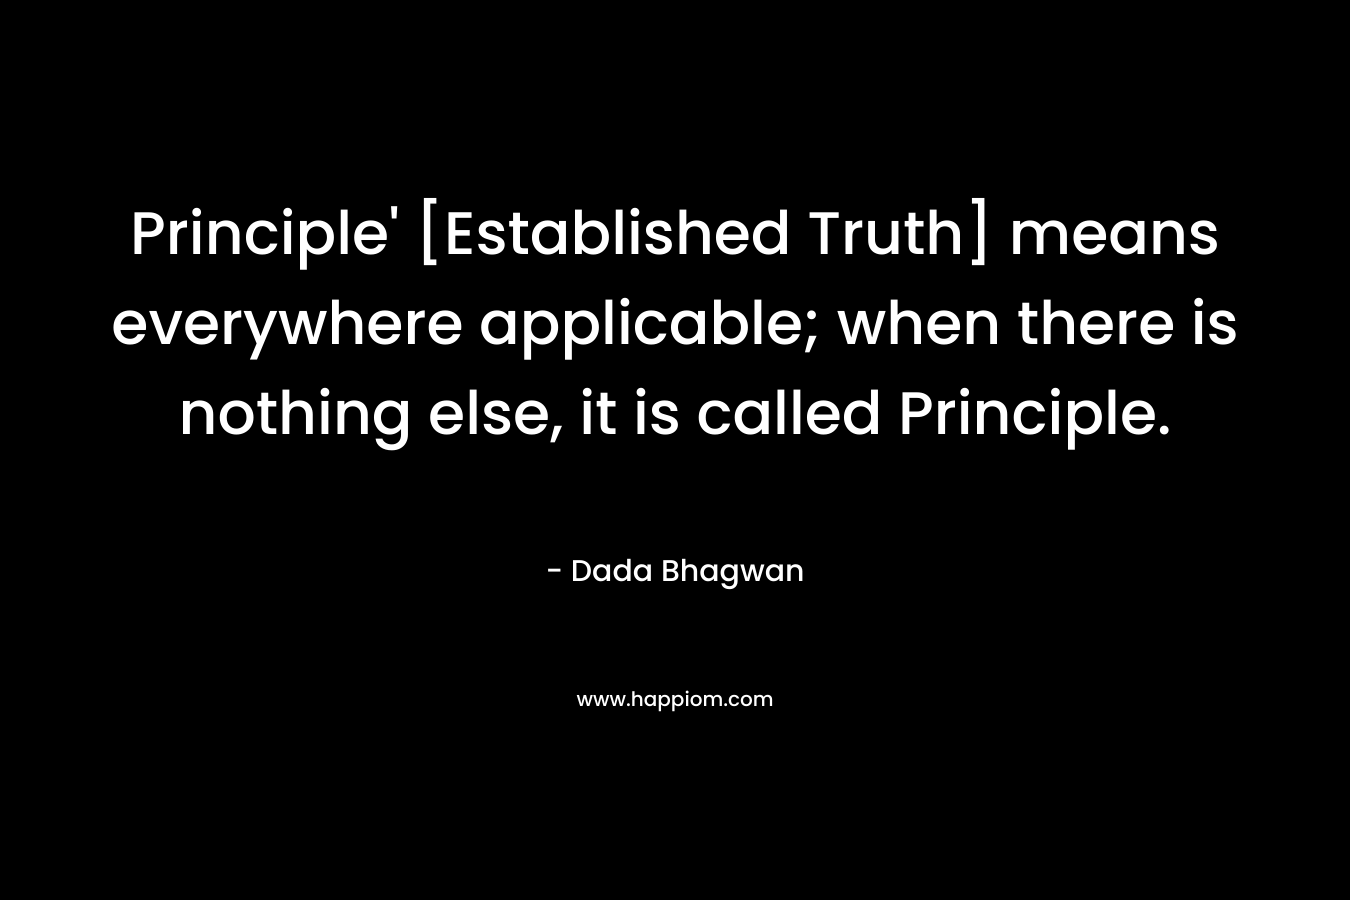 Principle' [Established Truth] means everywhere applicable; when there is nothing else, it is called Principle.